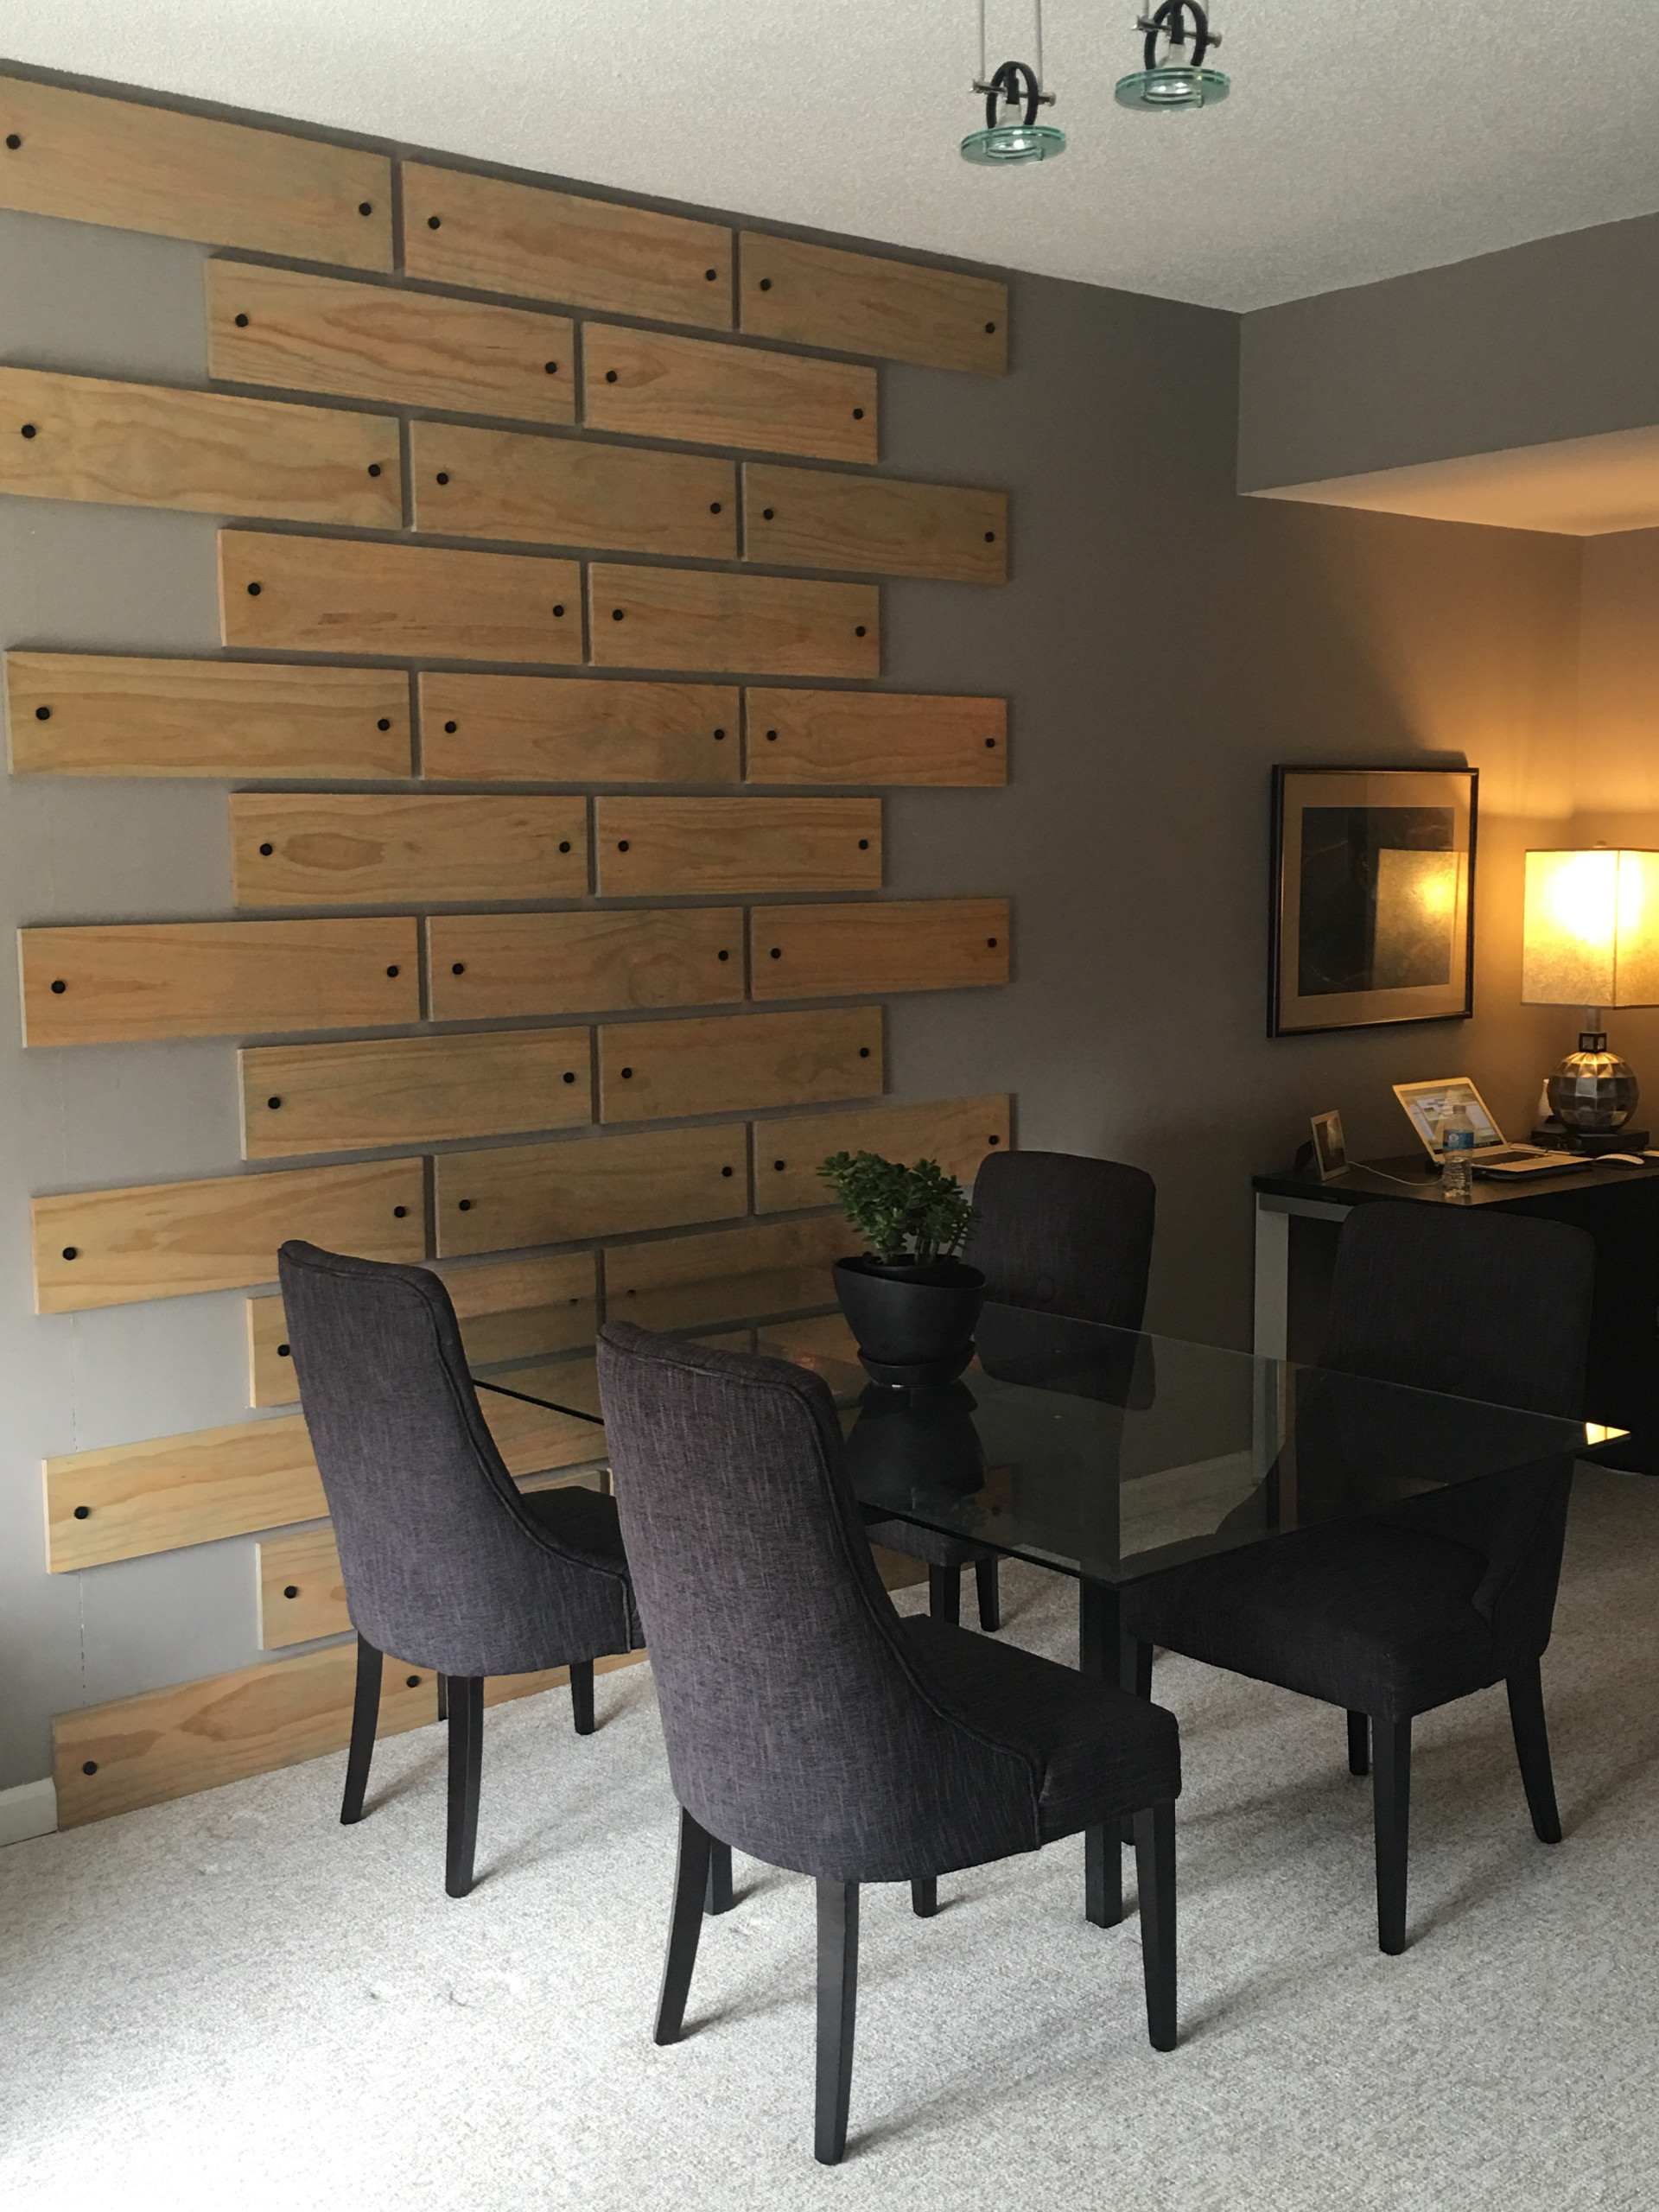 Accent wall in a high rise condo